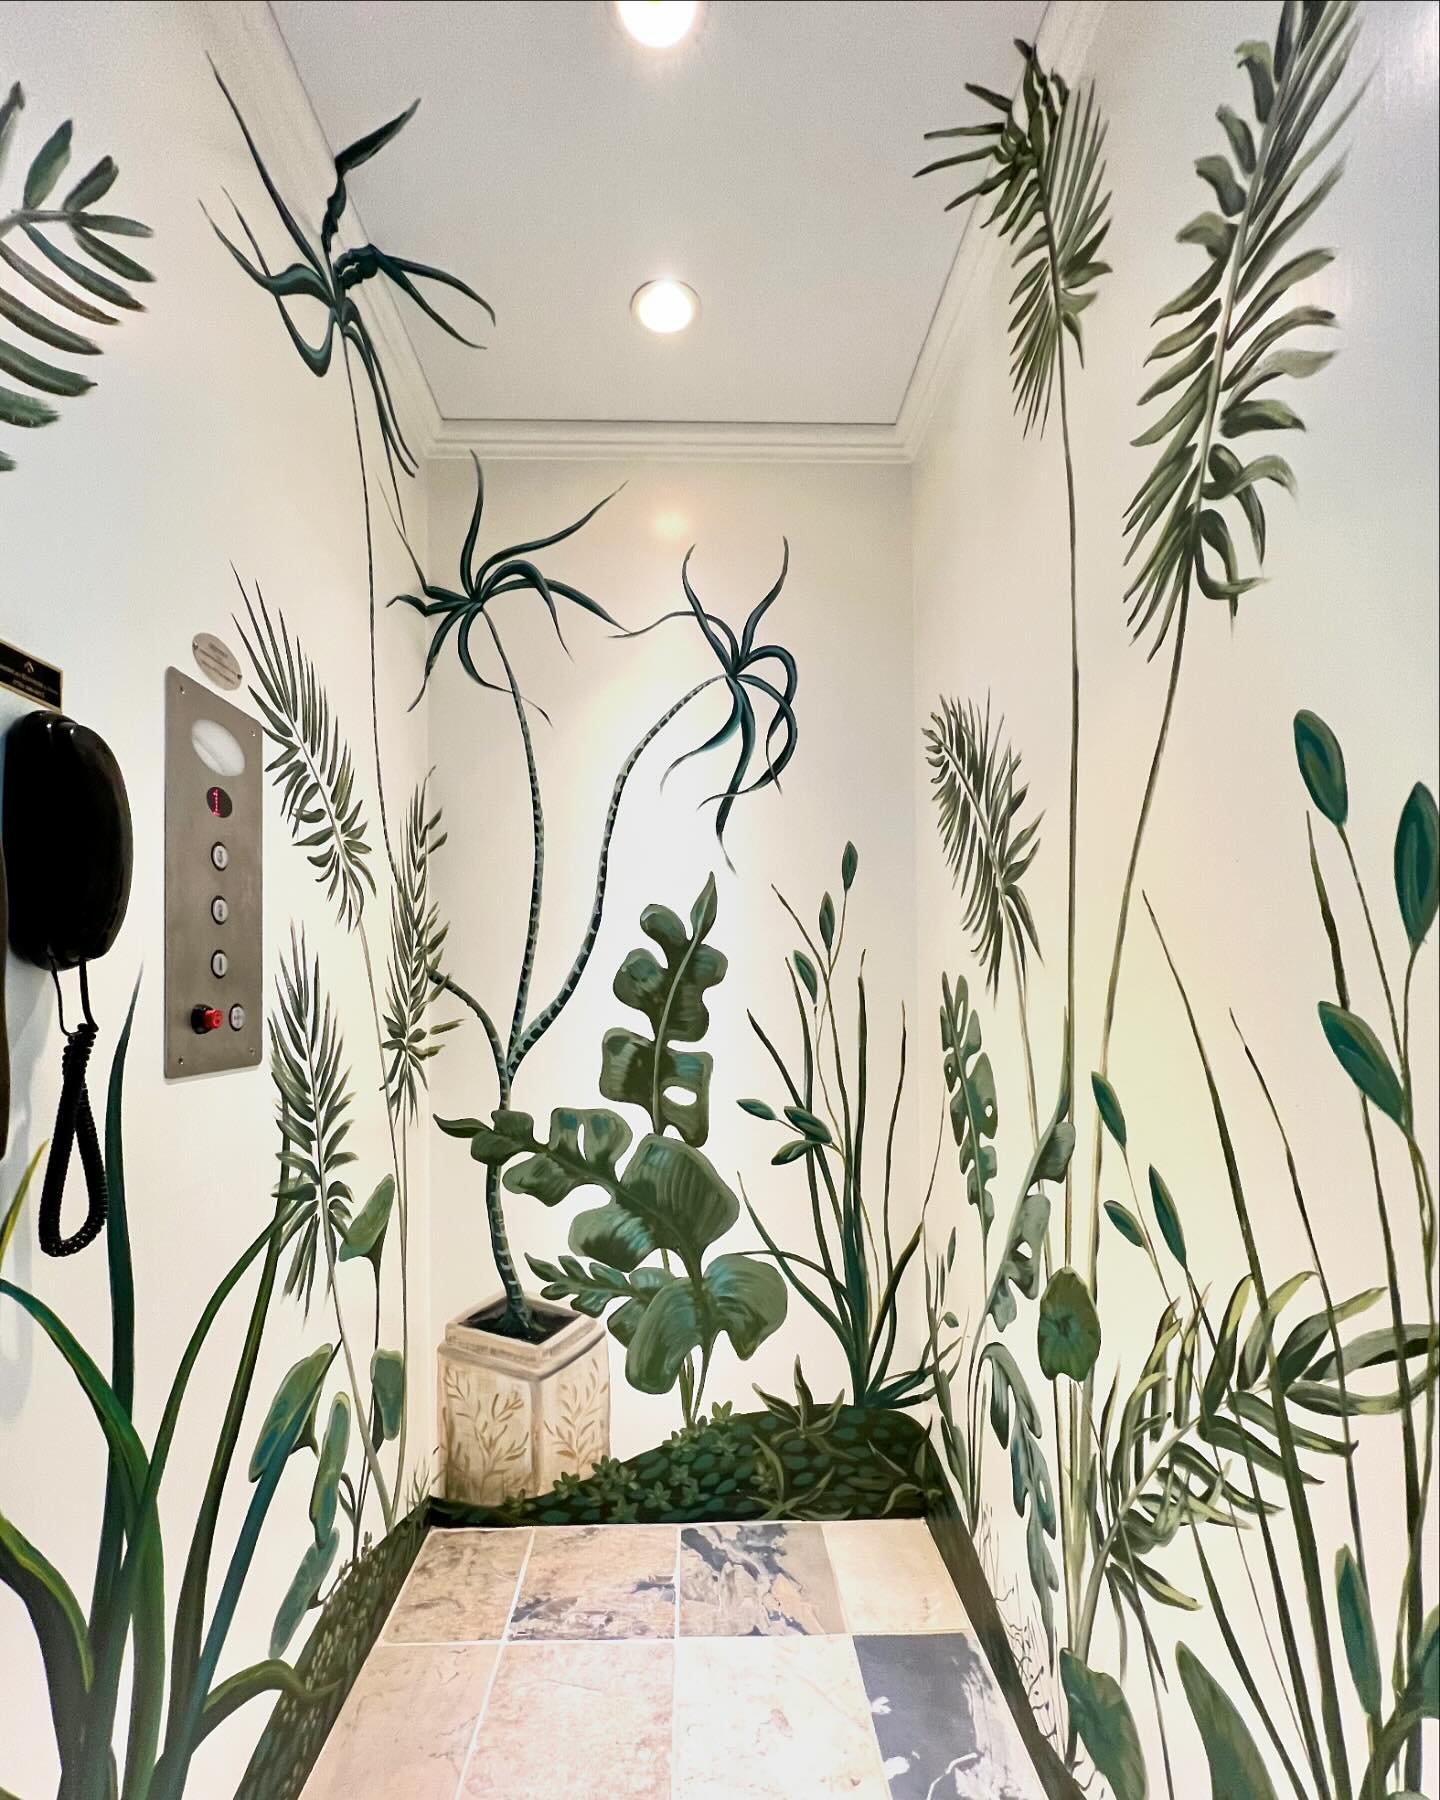 What better way to &ldquo;lift&rdquo; your spirits than to have a custom mural in your elevator! 

Thank you, @clintonrice for inspiring this green oasis in your elevator. 🌿🎉🙏

What other interesting spaces could I paint? This one was lots of fun,